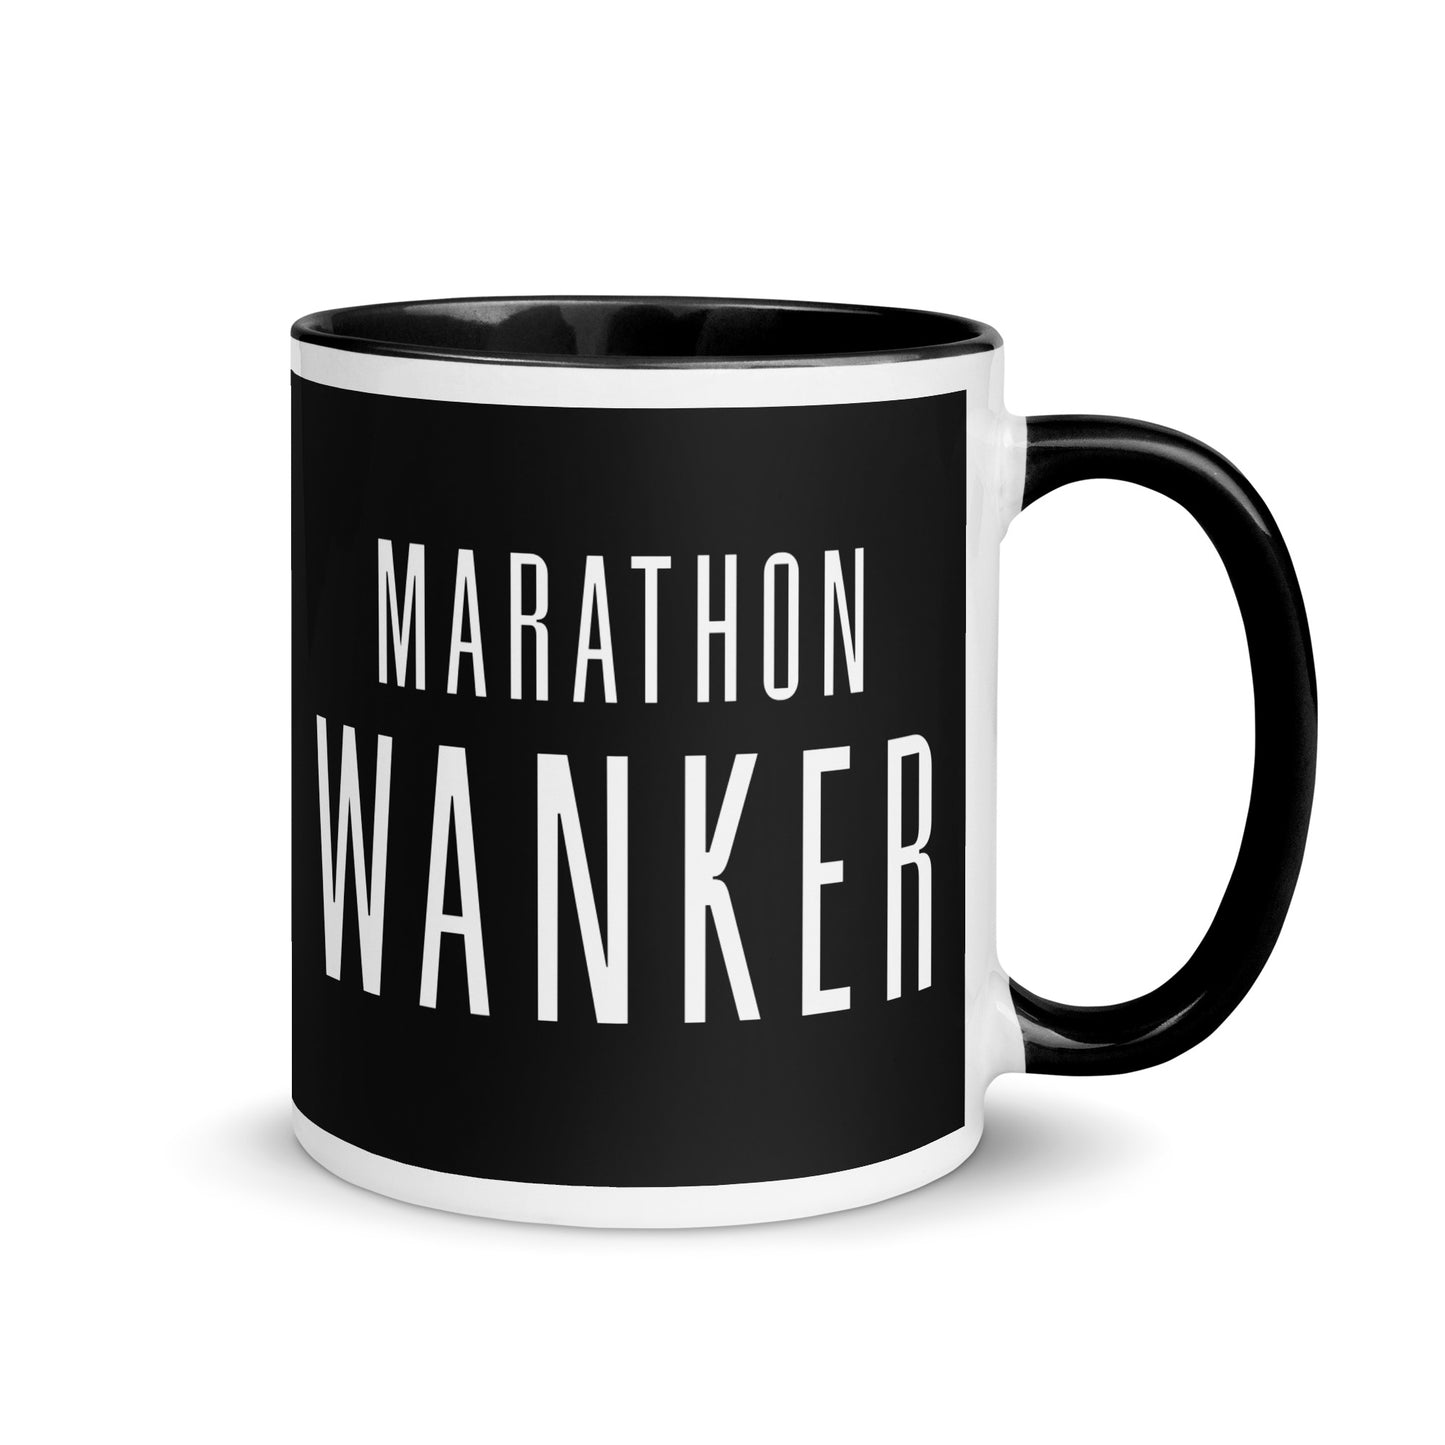 white and black mug with the words marathon wanker in a bold, white font on a black background. the mug has a black handle and inside